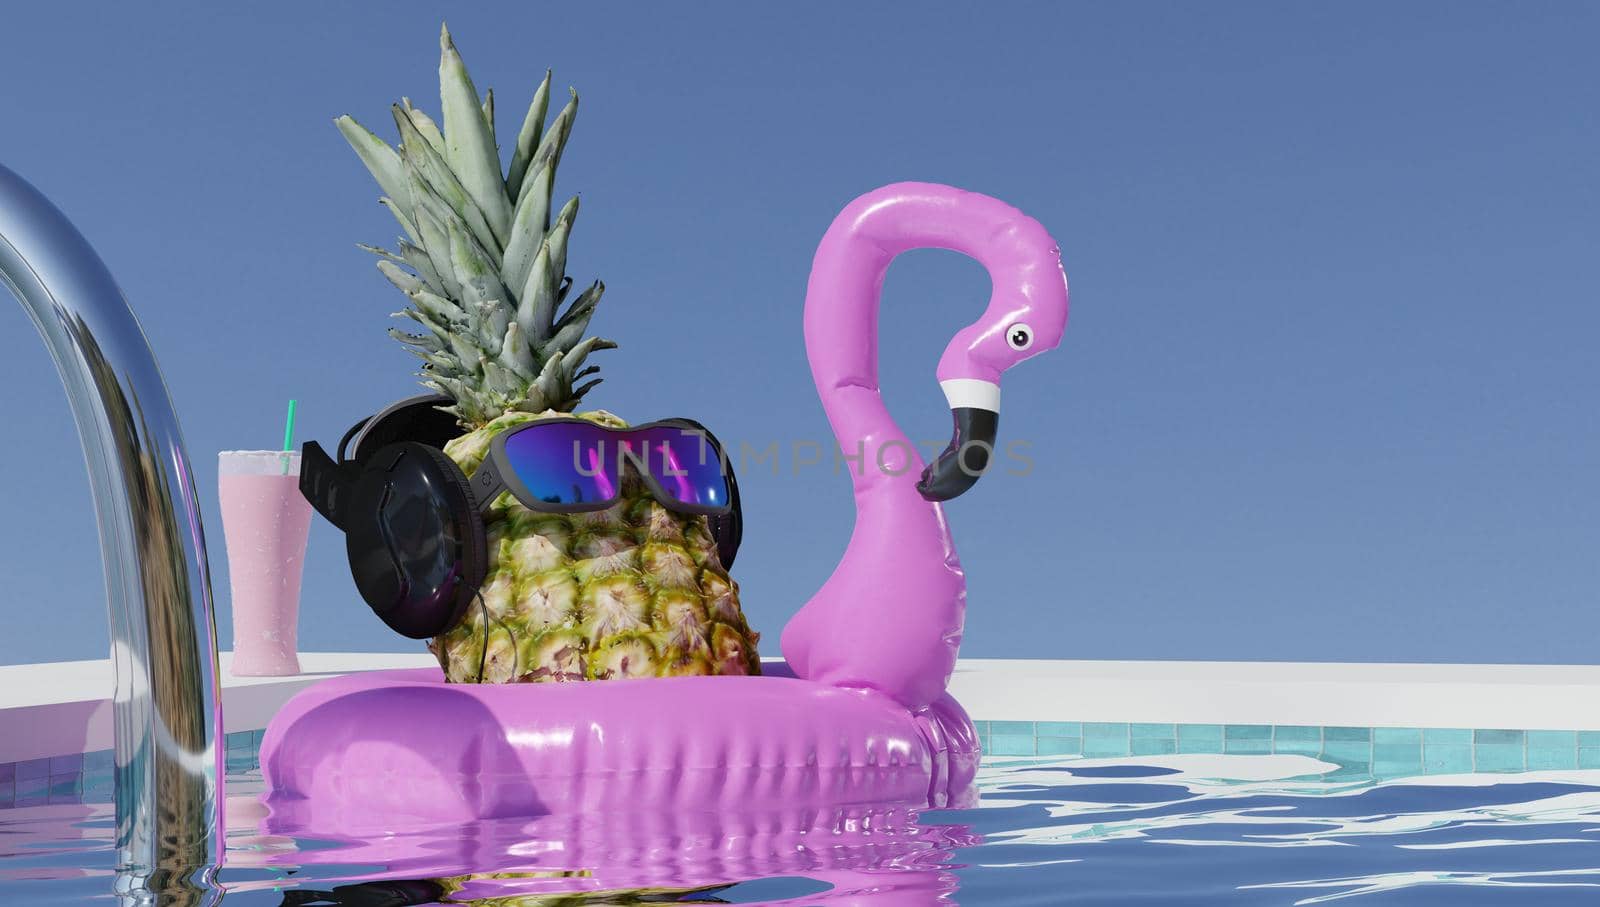 Summer Vacation and Swimming Pool Relaxation Lifestyles Concept, Pineapple With Sunglasses in Poolside at The Beach Vacations. Tropical Leisure Activities Relaxing and Holiday Resort. 3d rendering